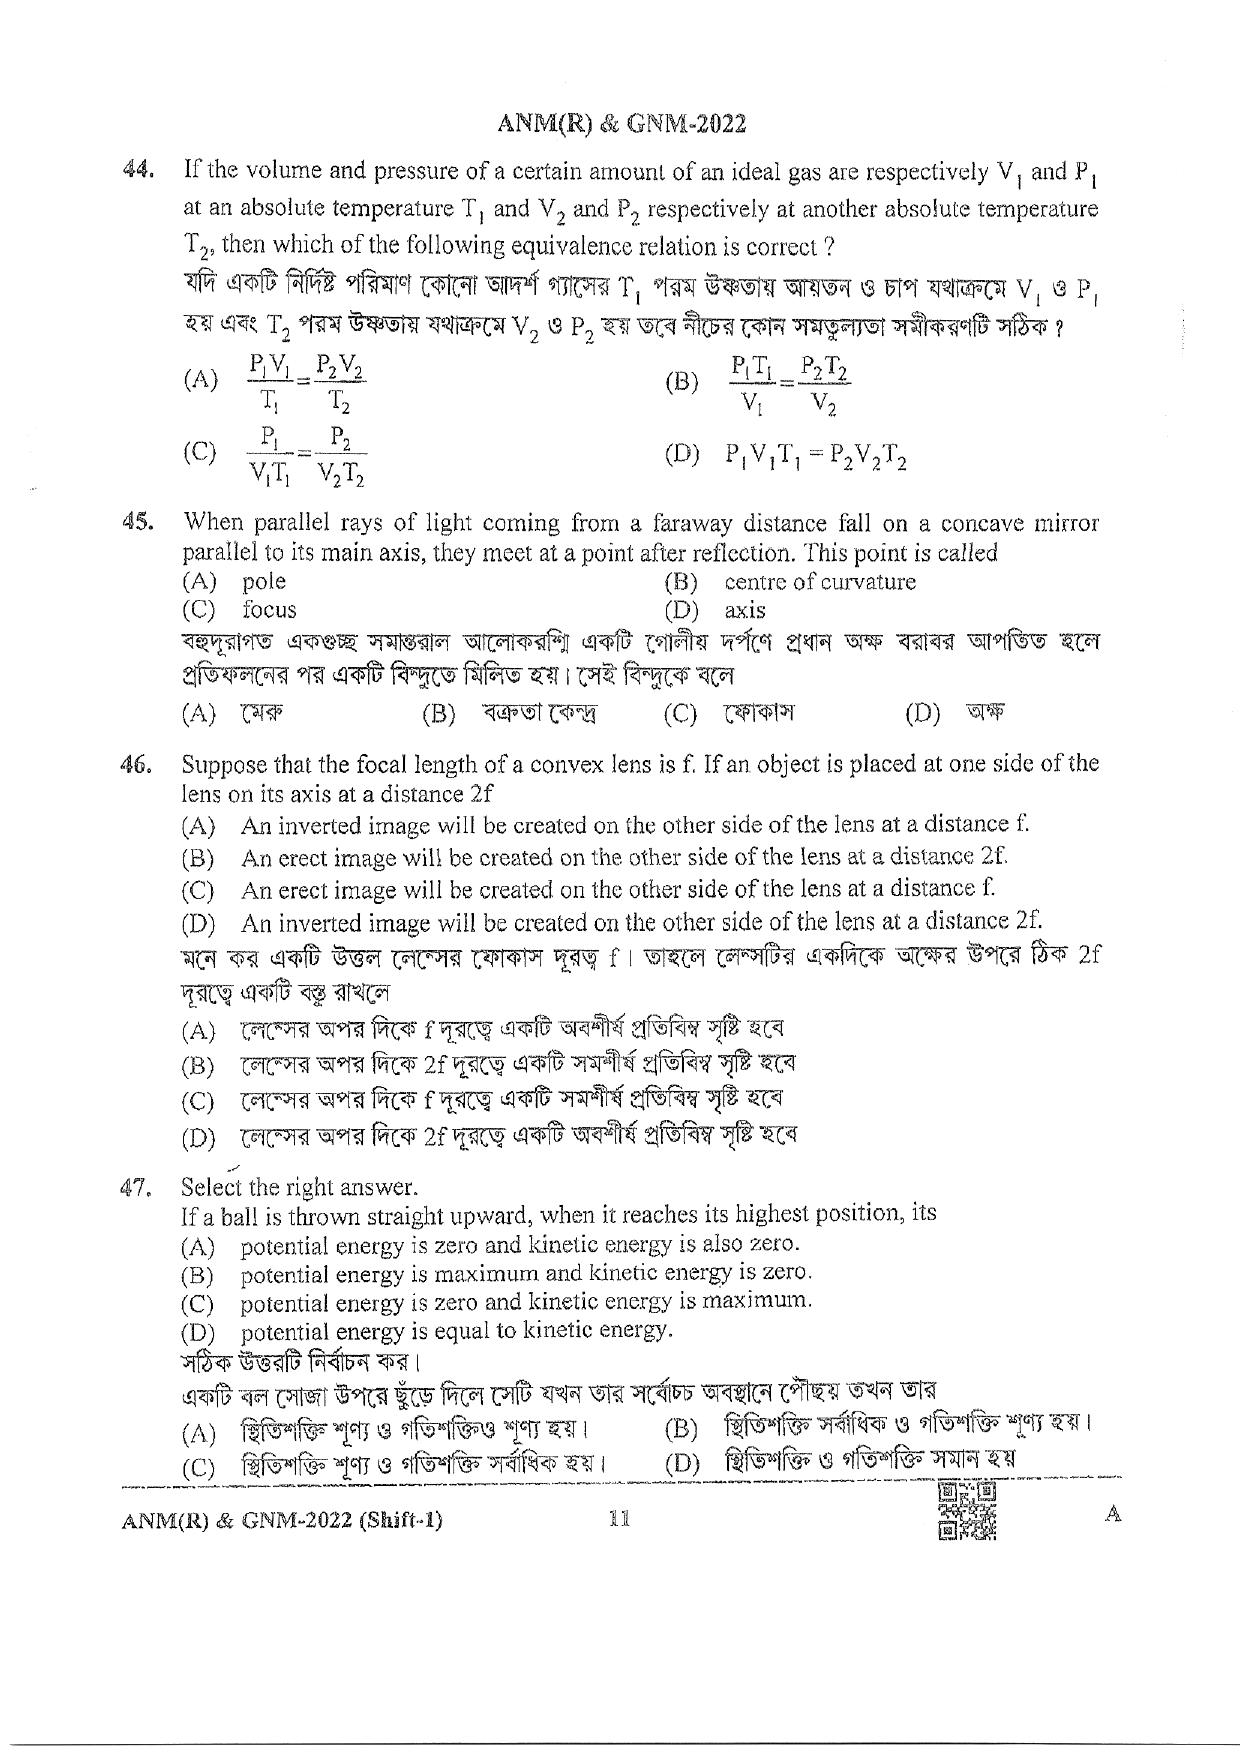 WB ANM GNM 2022 Question Paper - Page 11